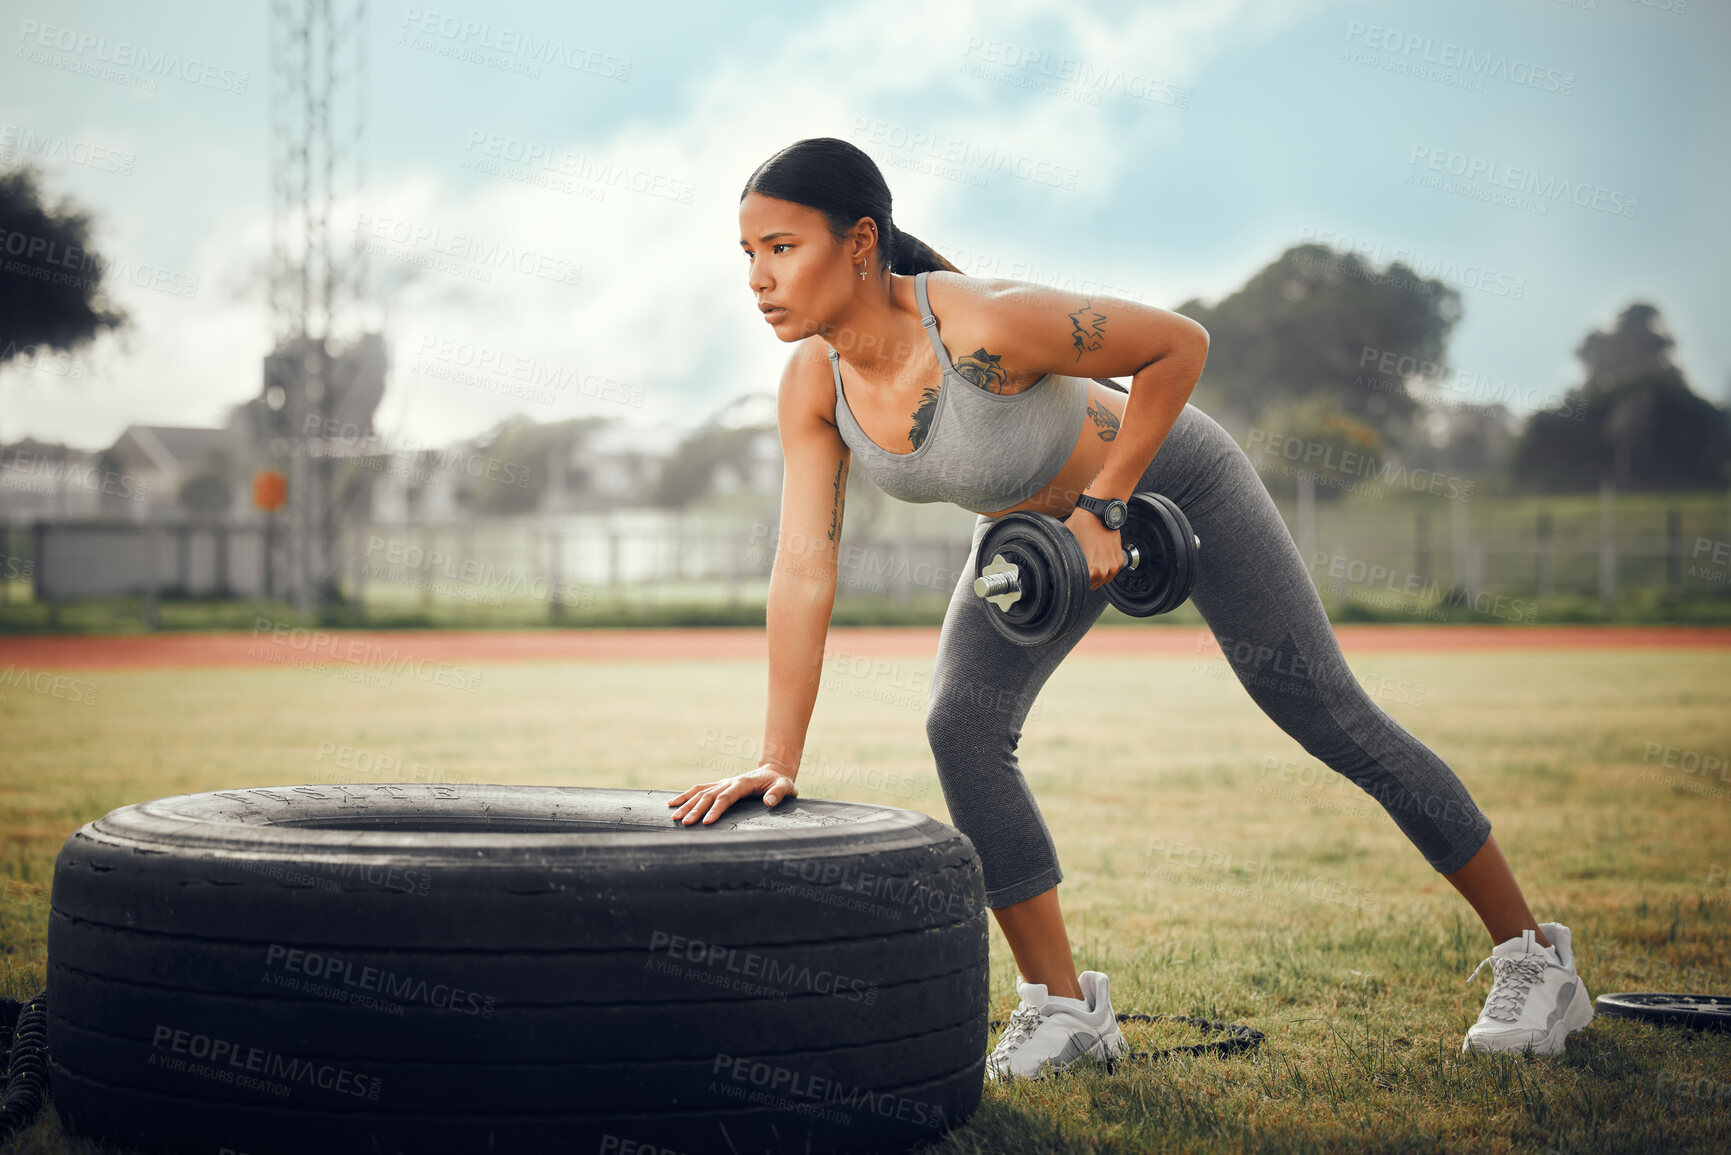 Buy stock photo Full length shot of an attractive young female athlete exercising with dumbbells outdoors